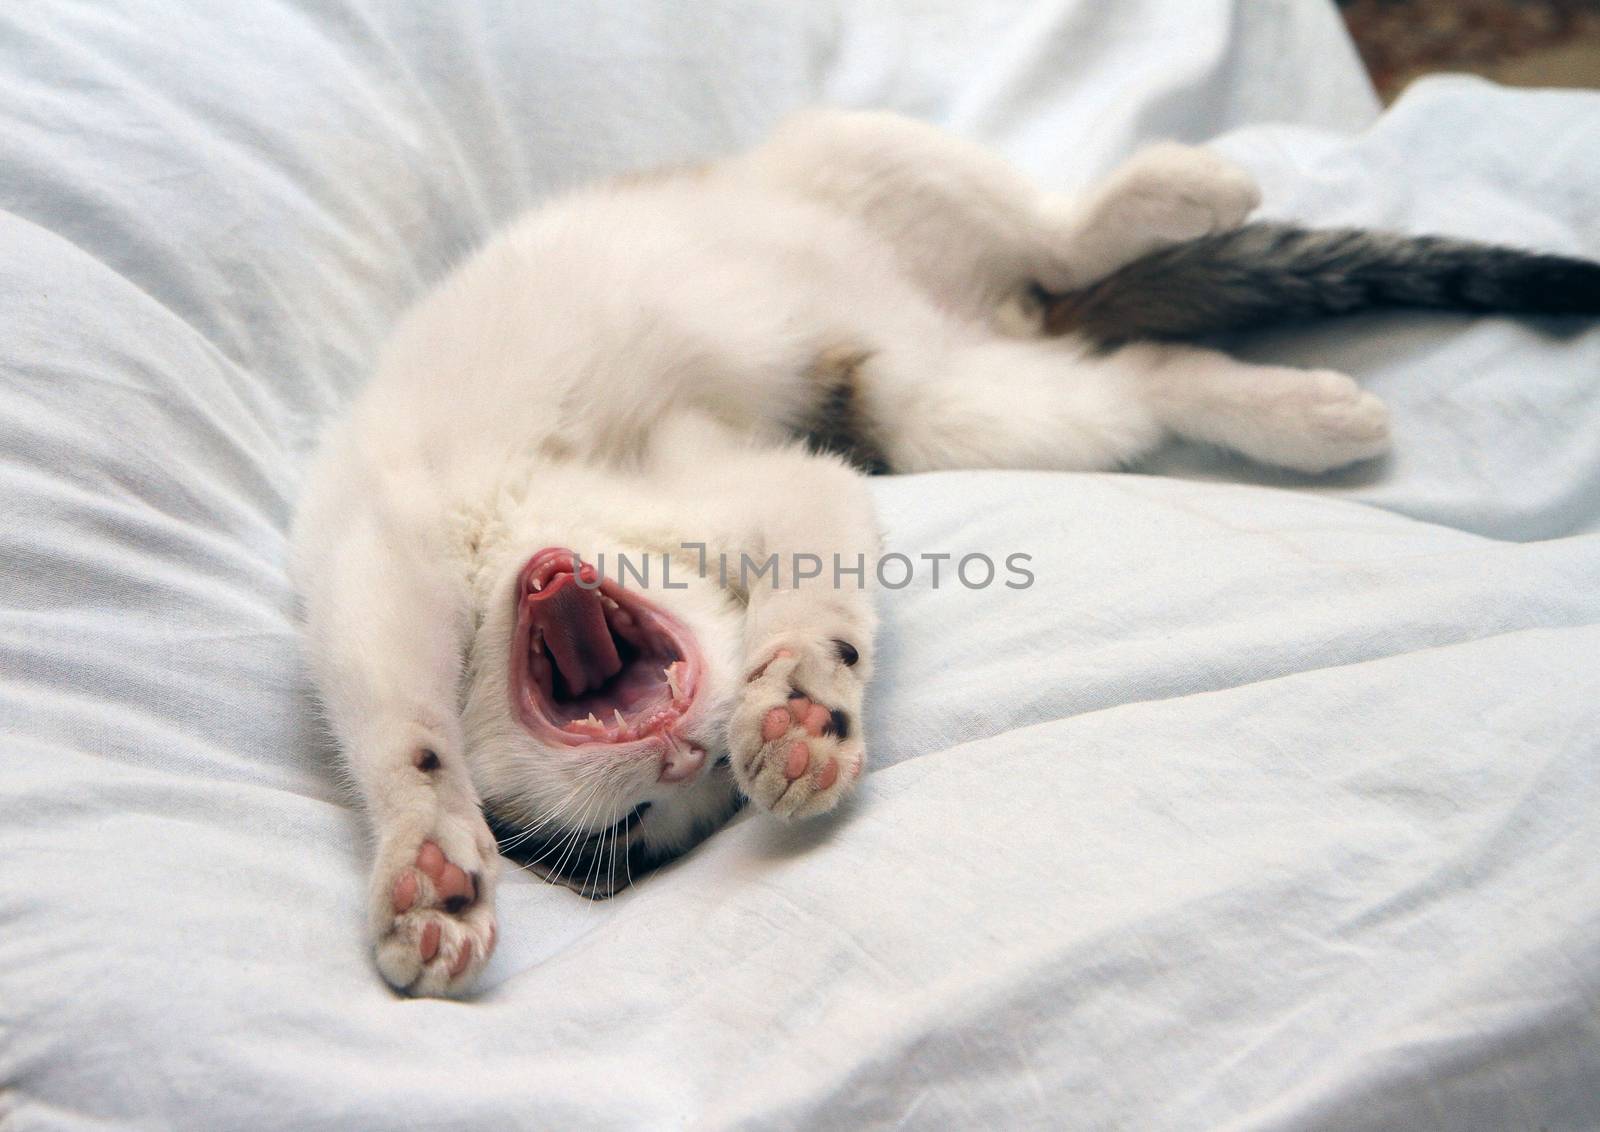 Little funny kitten lying down and yawning.